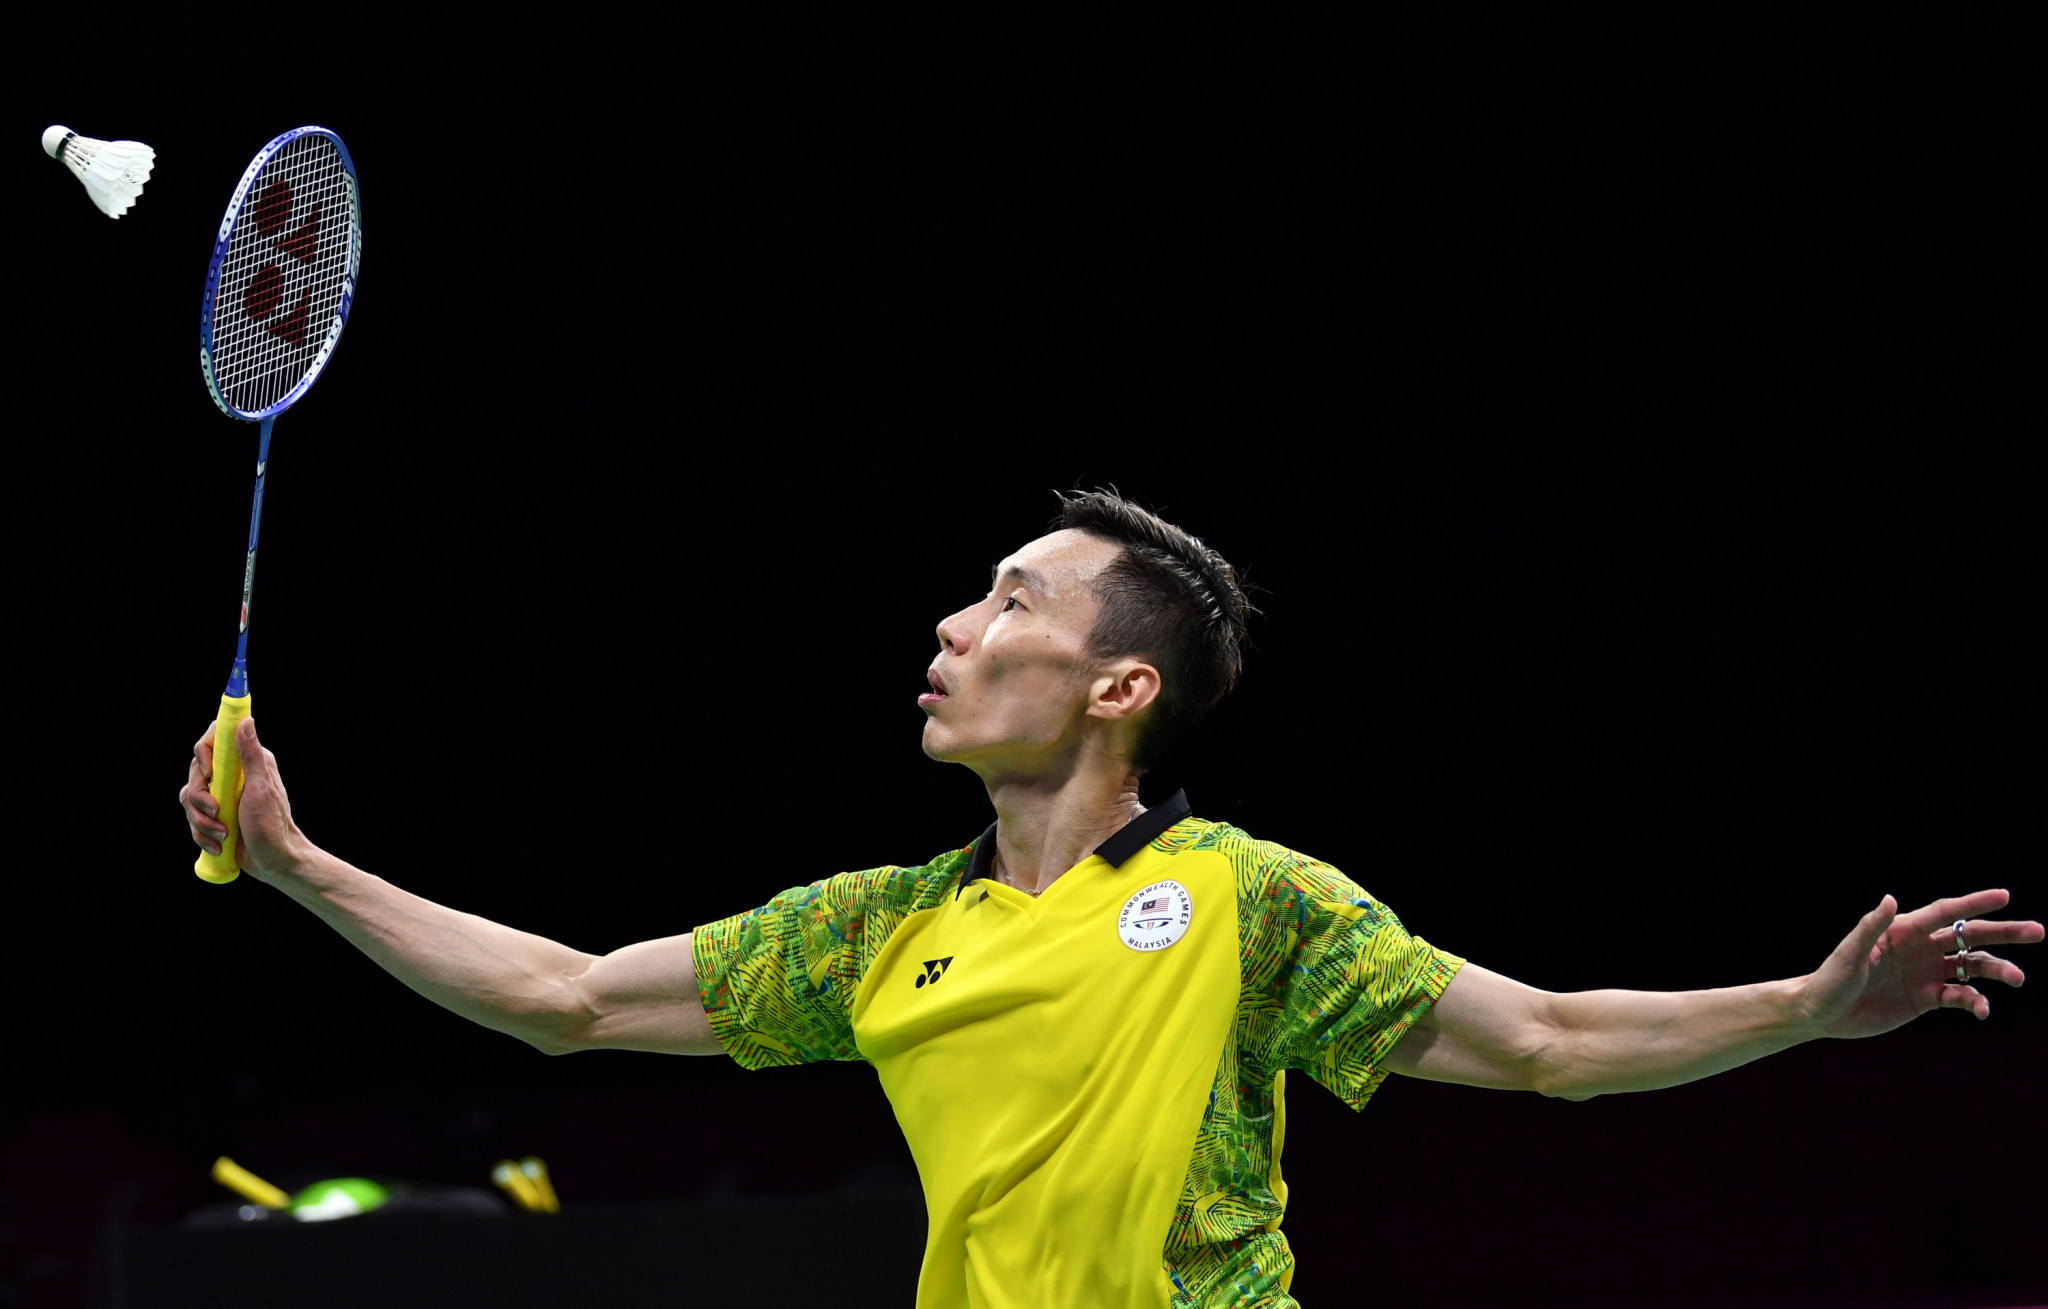 Malaysia's Lee Chong Wei is among the headline names due to participate at the Badminton Asia Championships in Wuhan ©Getty Images